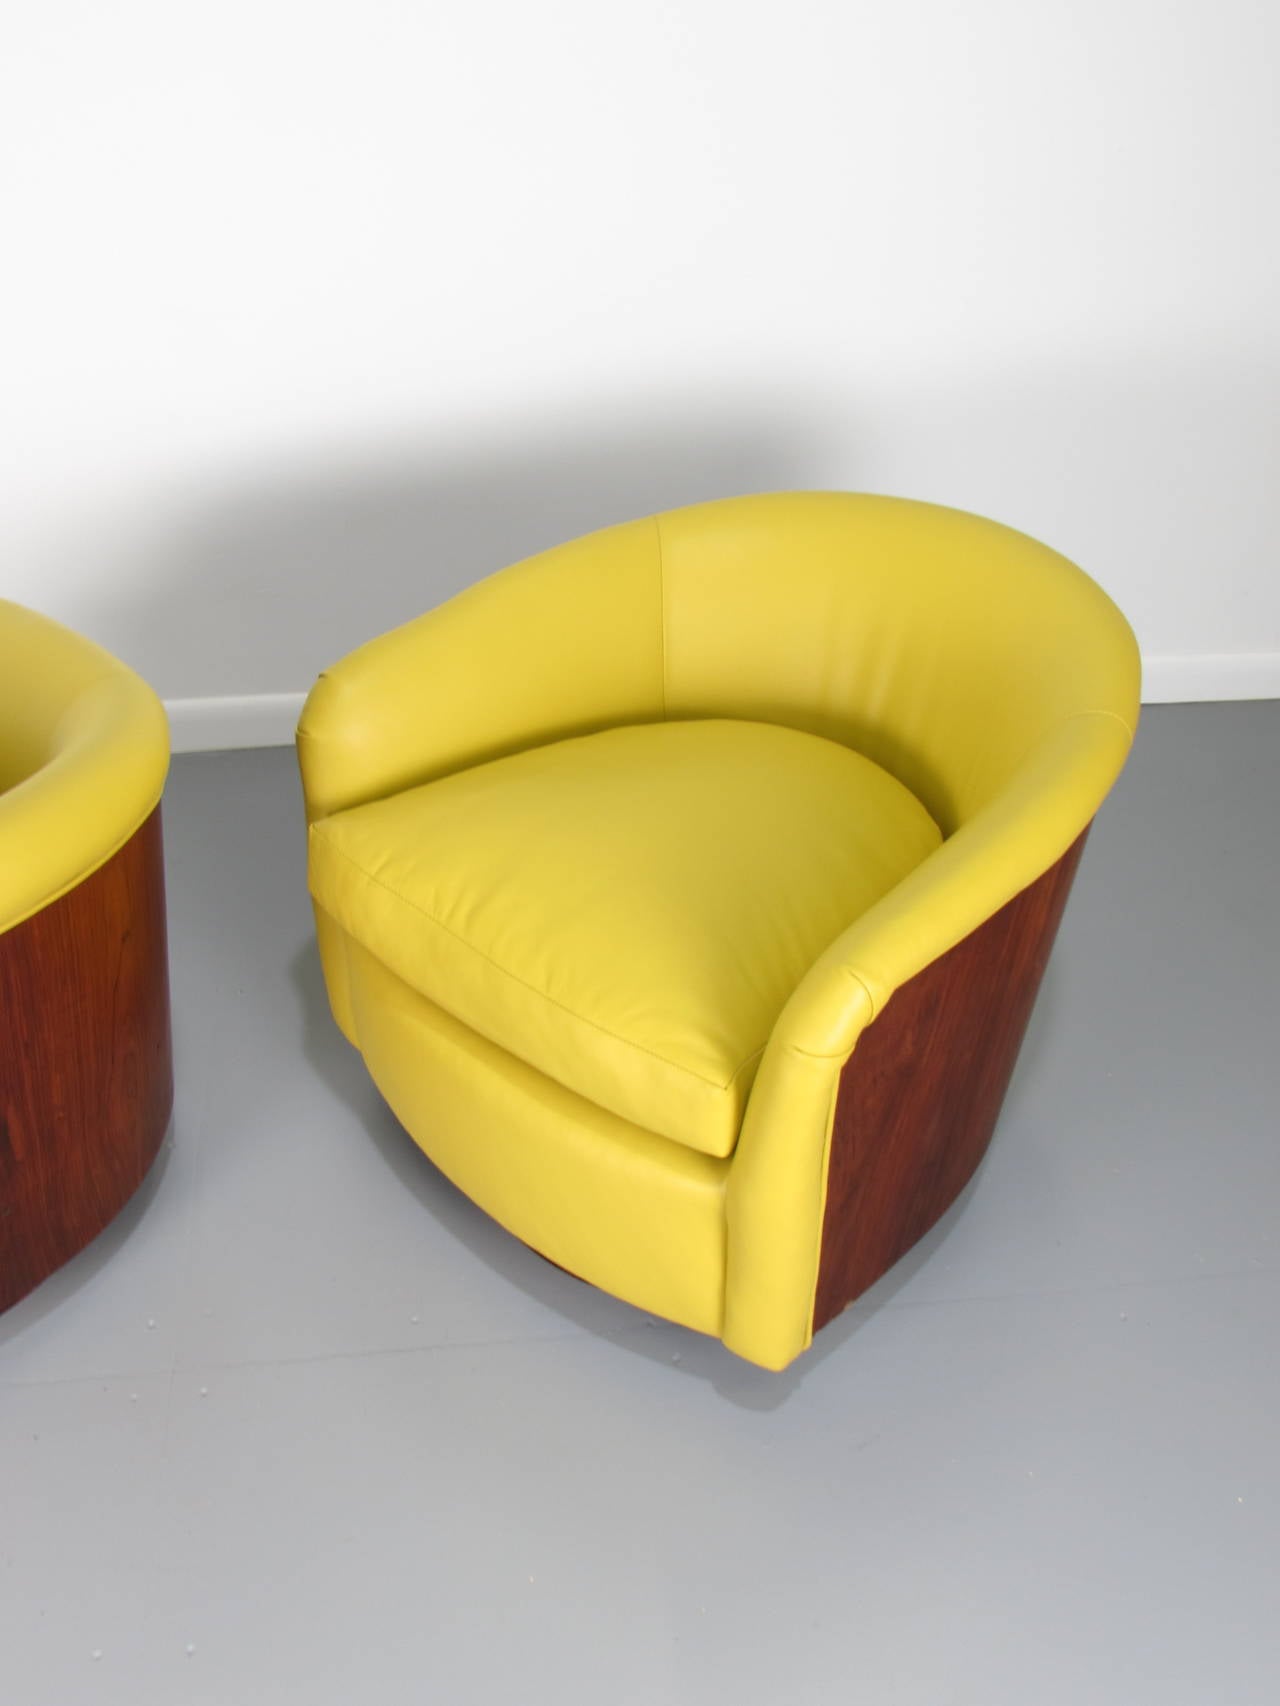 Rare Rosewood Wrapped Swivel Tub Chairs in Leather by Milo Baughman, 1970s 2